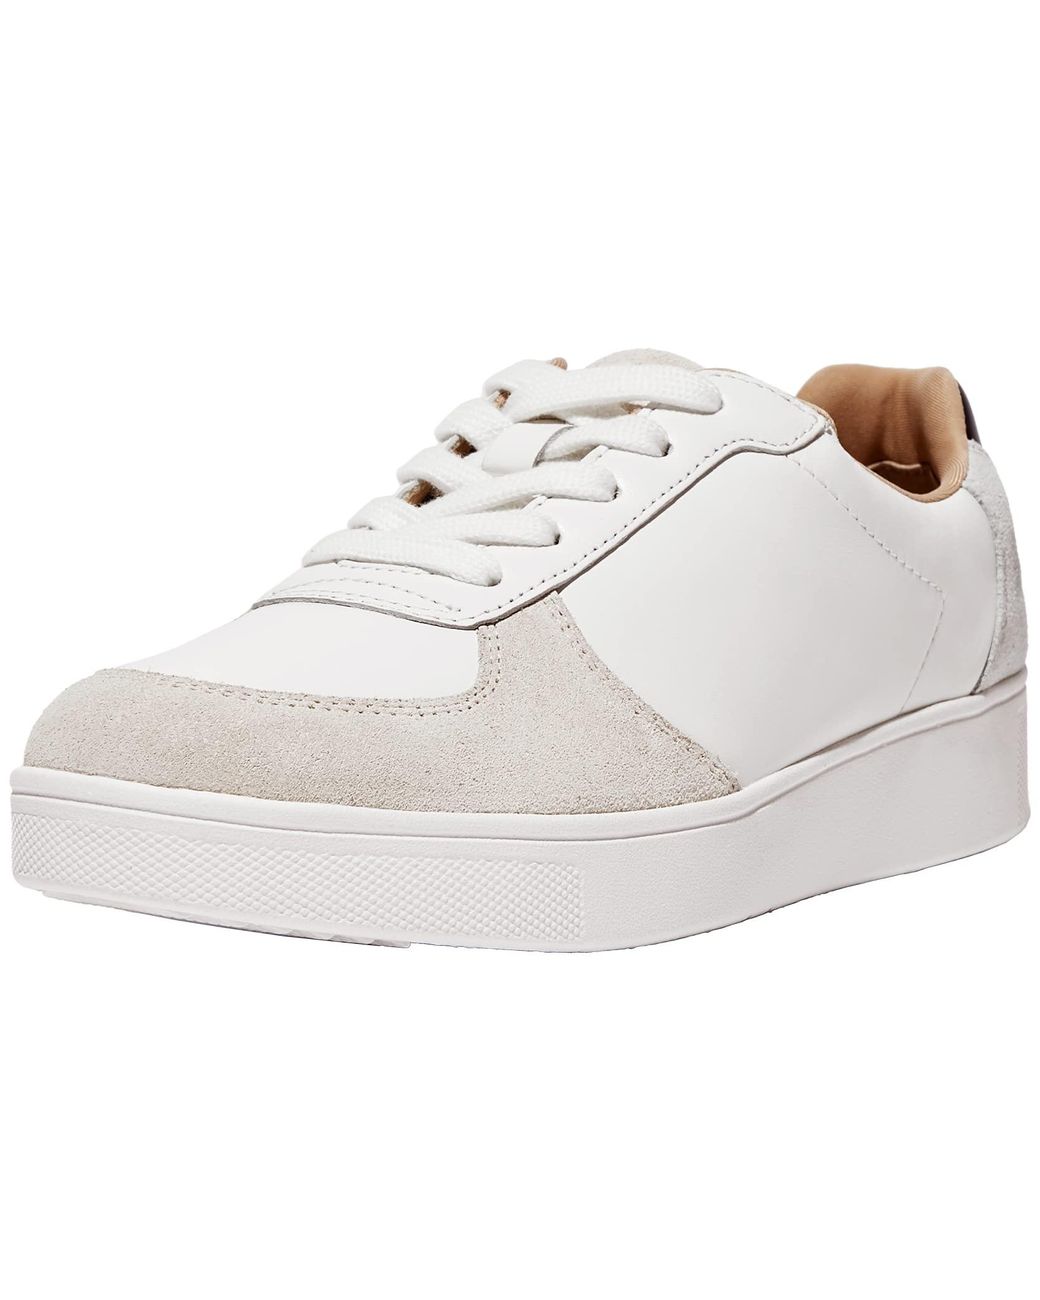 Fitflop Rally Leather/suede Panel Sneaker in White | Lyst UK